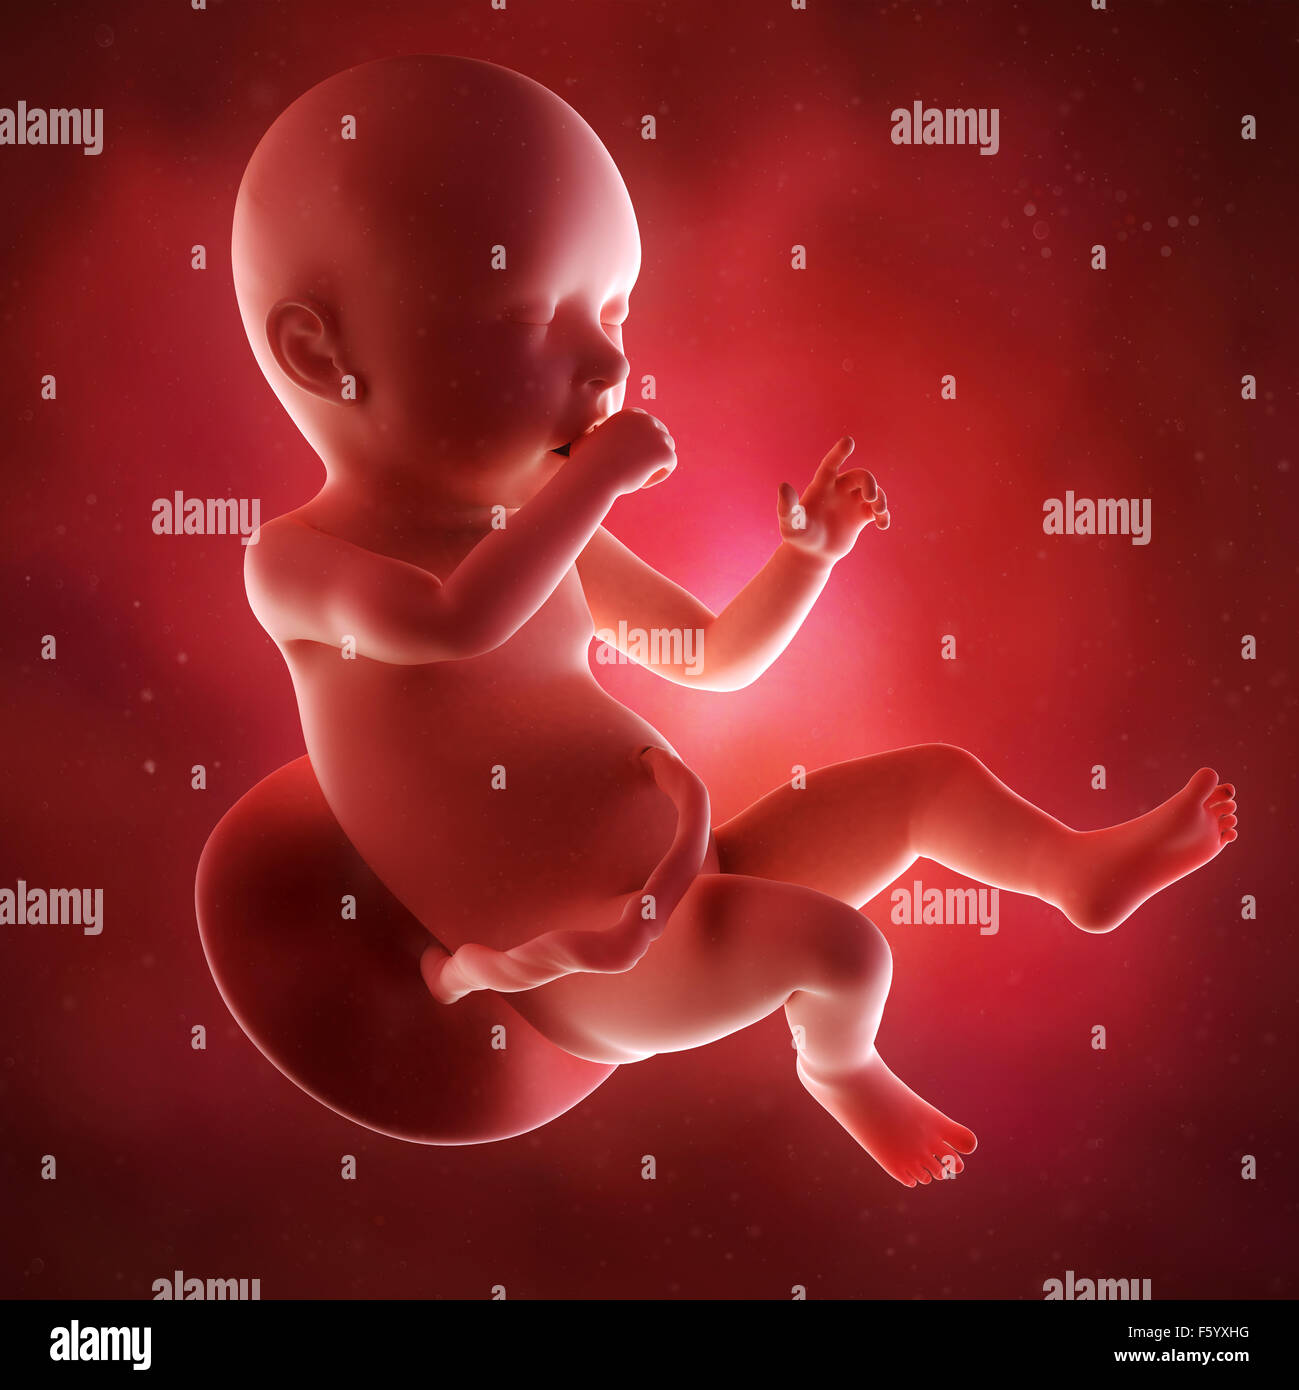 medical accurate 3d illustration of a fetus week 40 Stock Photo